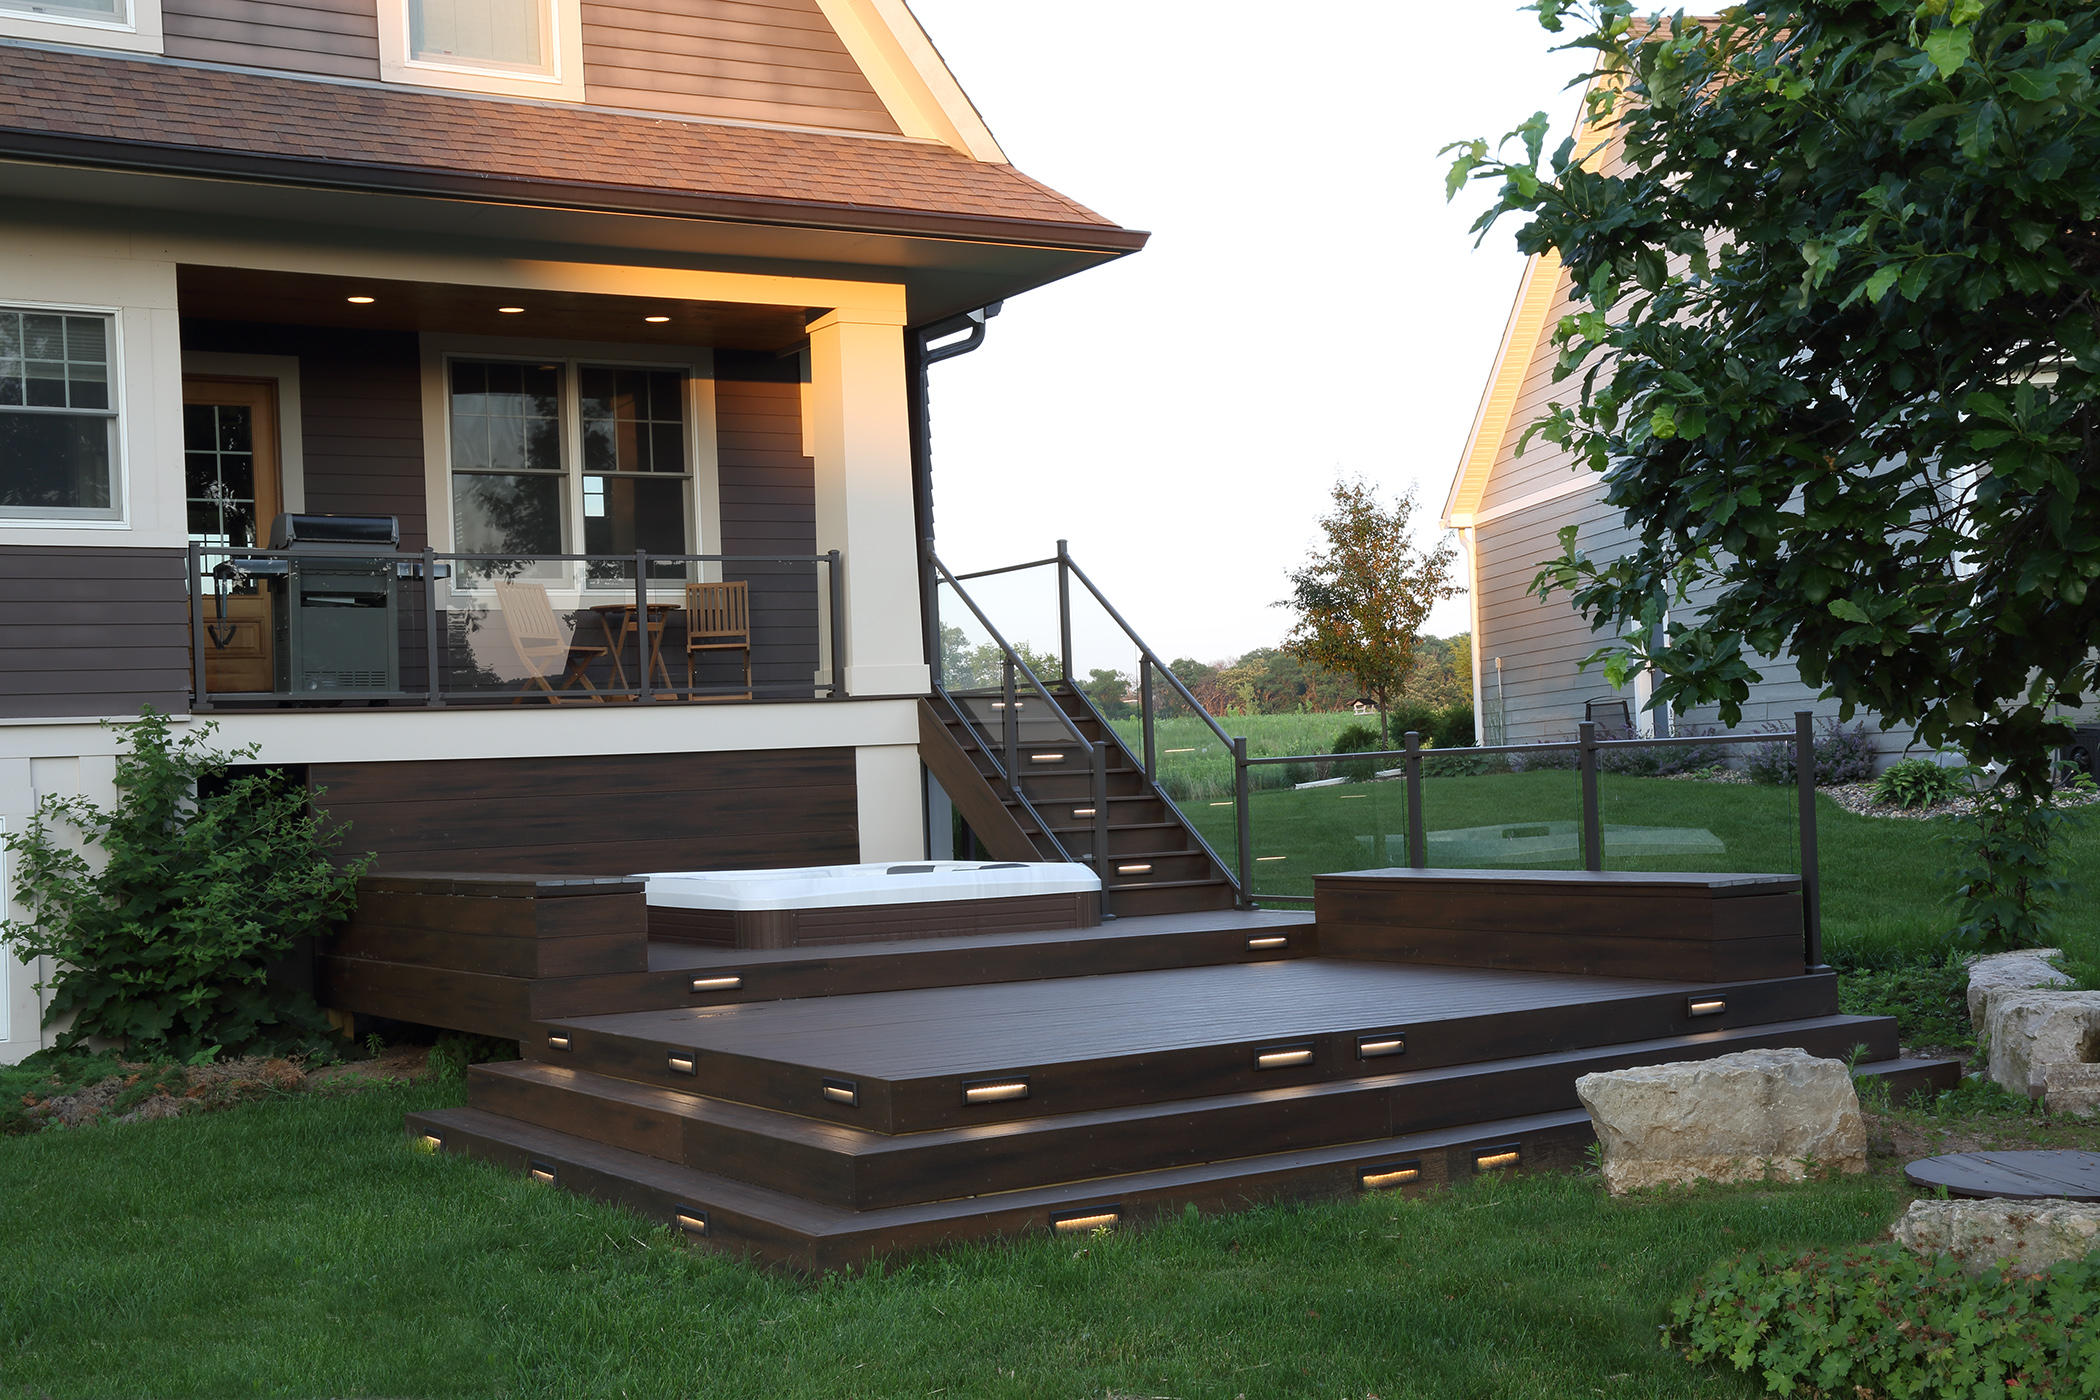 Low Voltage Wiring accents this custom built deck. J.G. Hause Construction, Inc Oakdale (651)439-0189